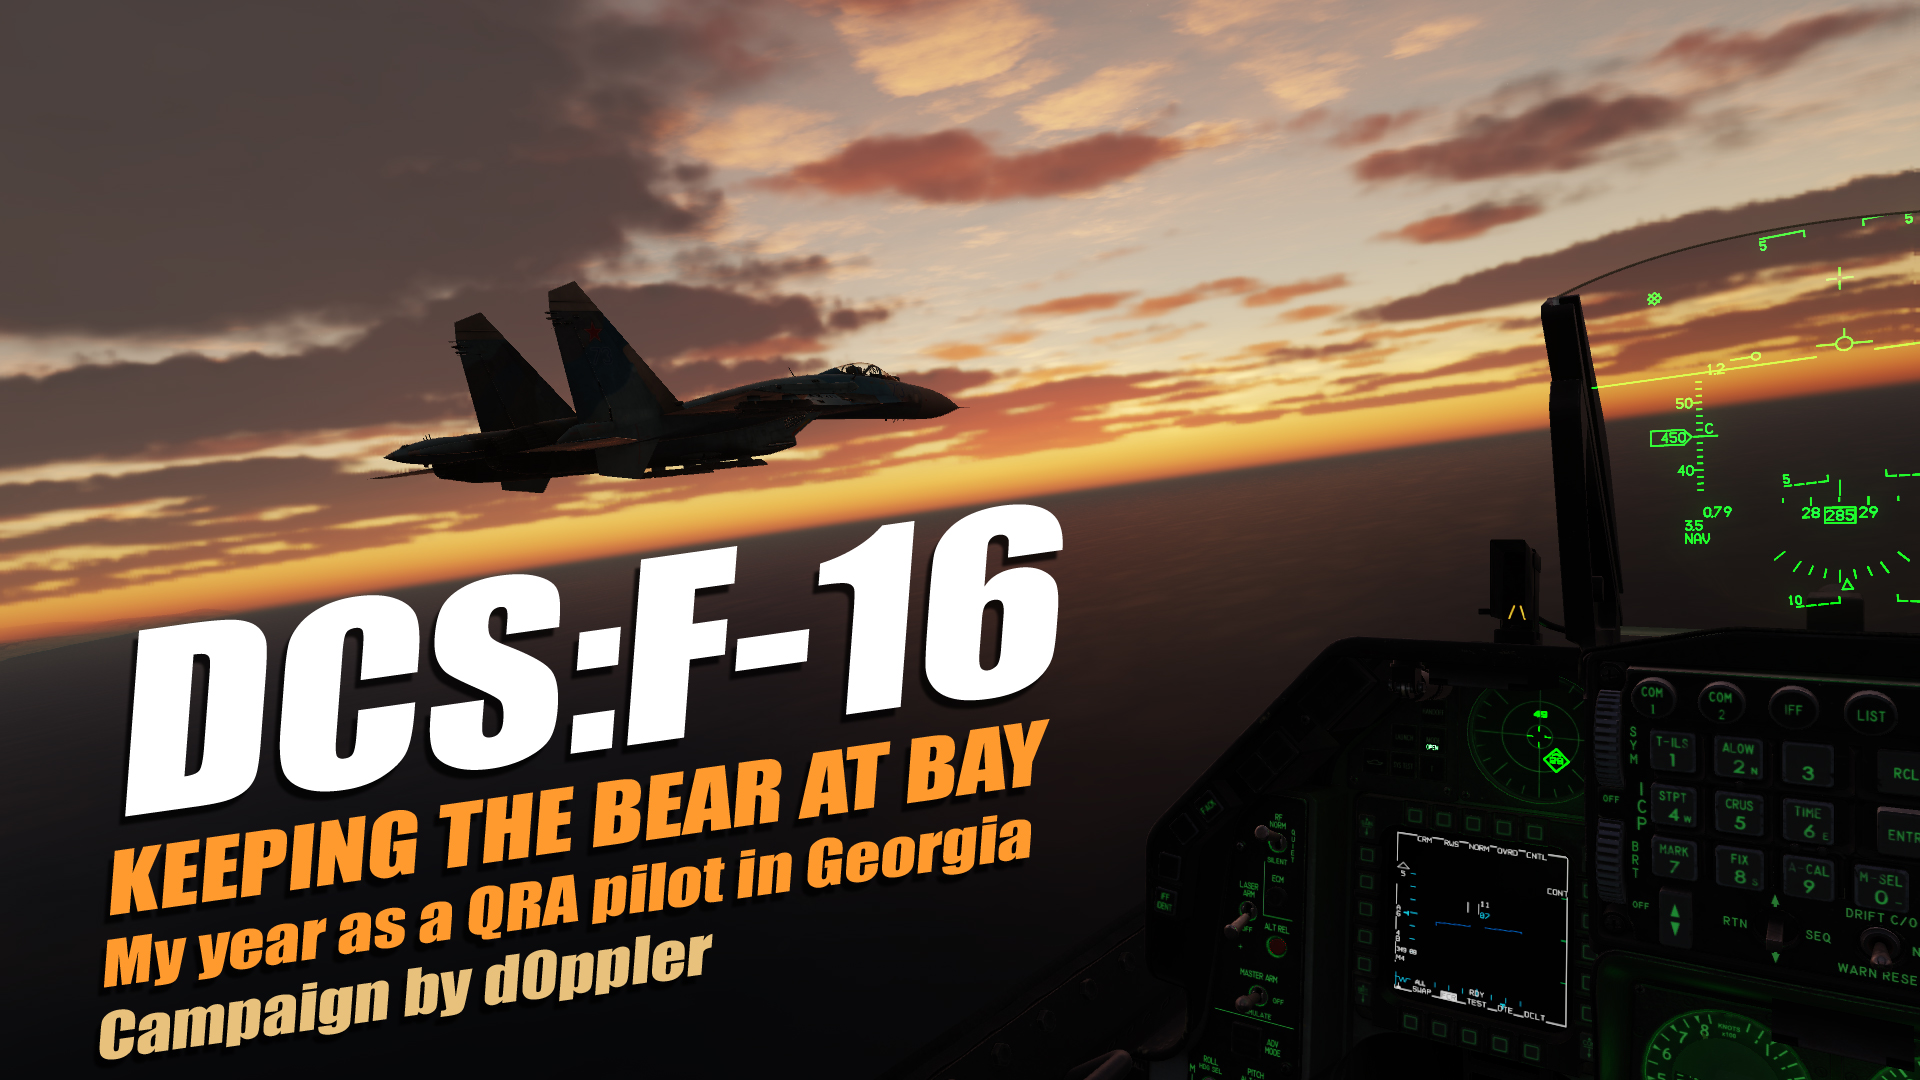 Keeping the bear at bay - 2.8 Viper Campaign with voiceovers - QRA missions - Cold war